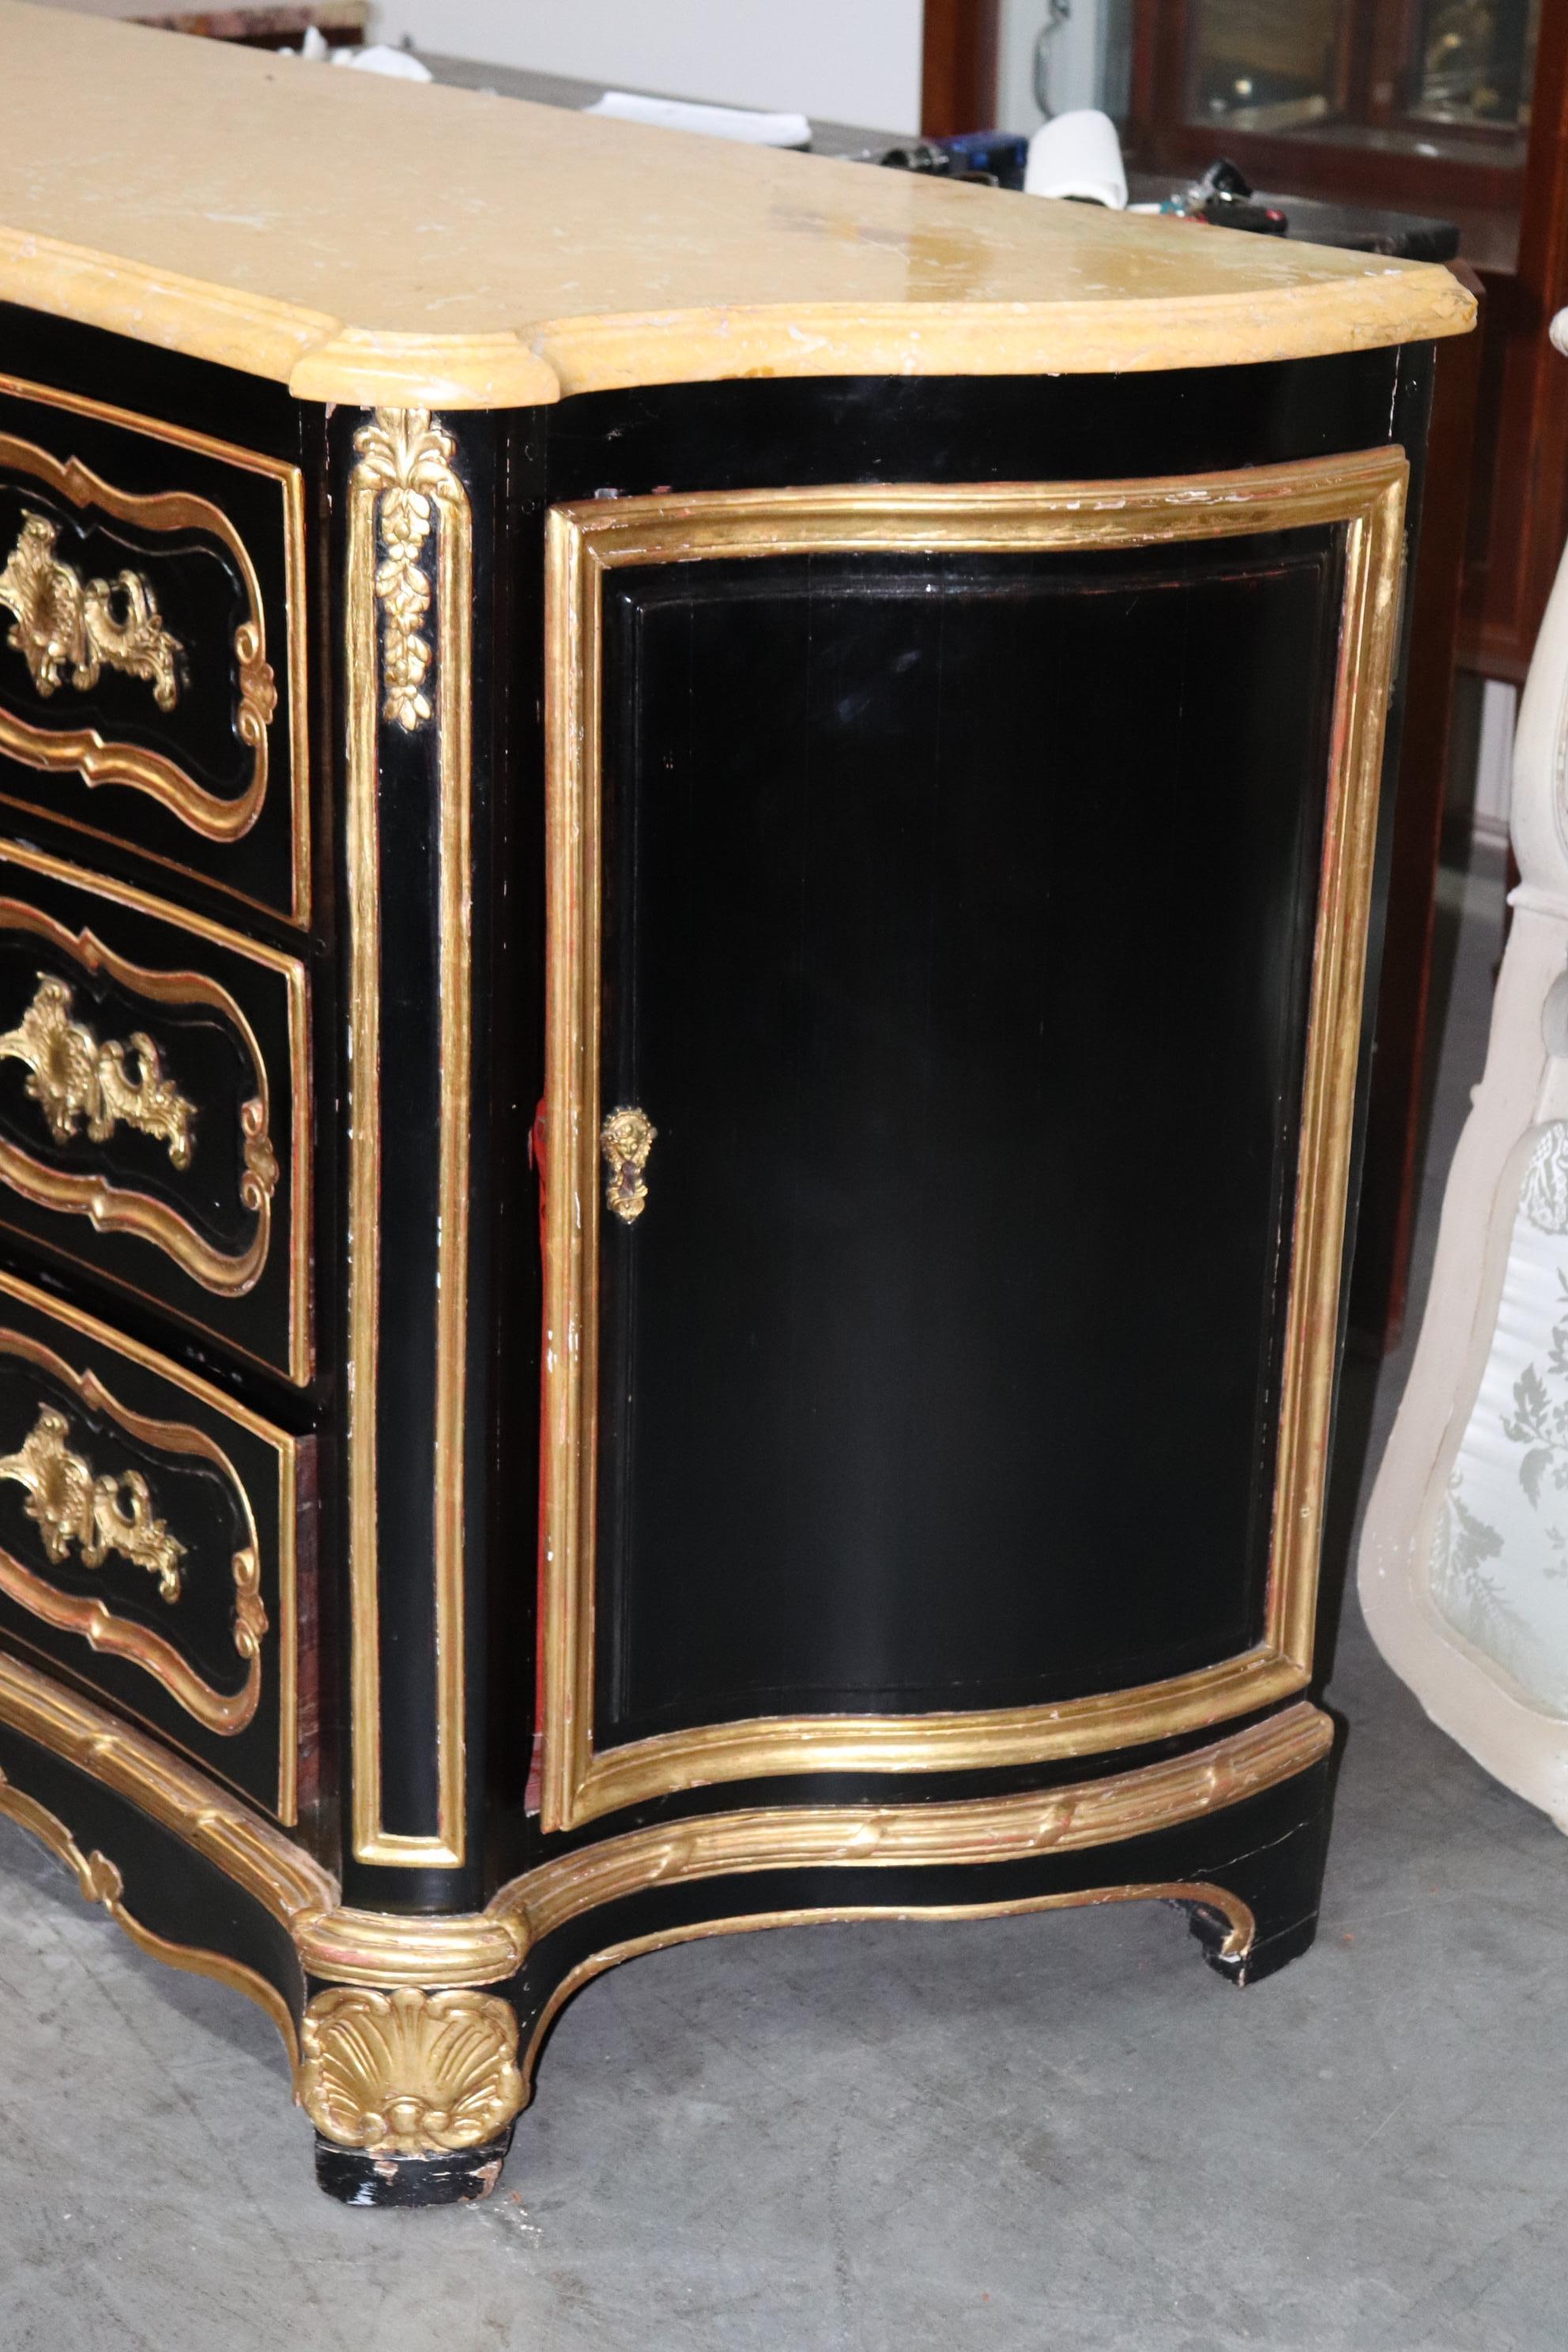 Huge Gilded Ebonized Period French Louis XV Marble Top Butlers Desk Commode For Sale 2